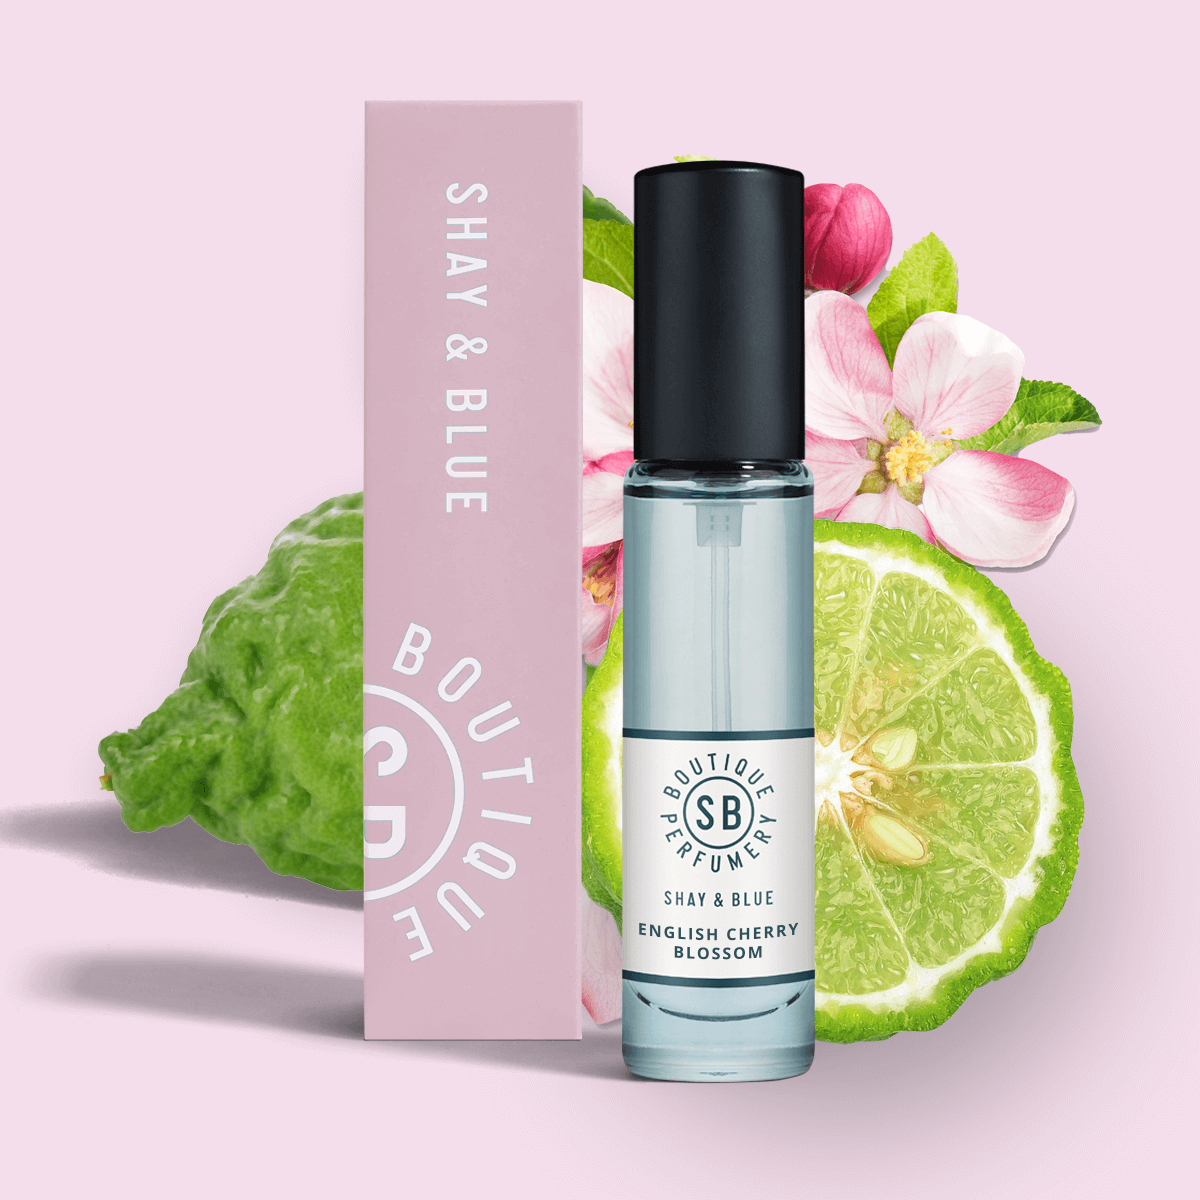 English Cherry Blossom Fragrance 10ml | Airy blossom with black cherries, fig and bergamot for a sparkling citrus lift. | Clean All Gender Fragrance | Shay & Blue